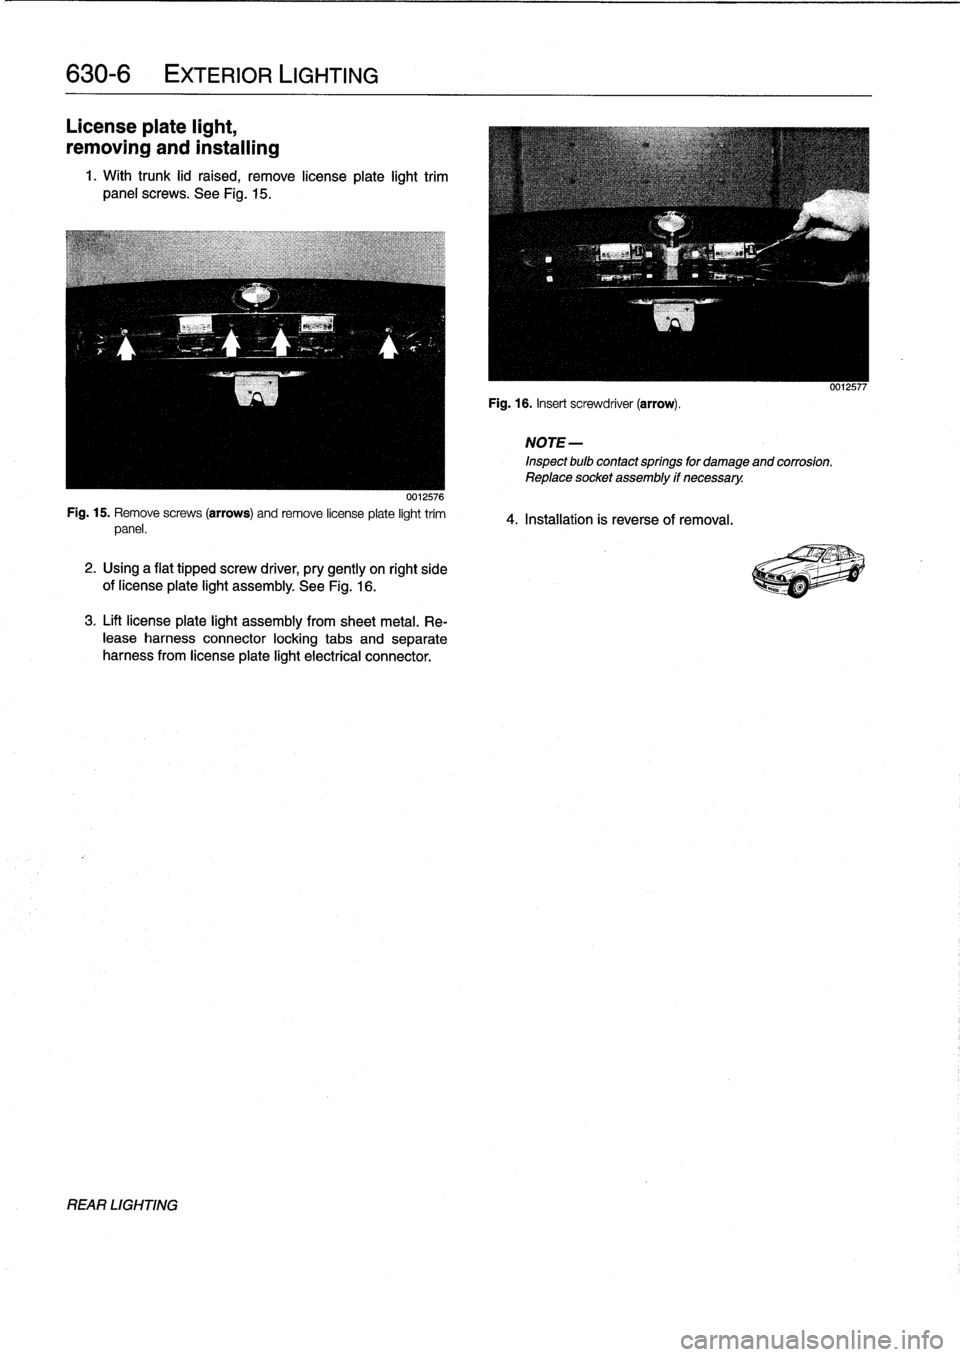 BMW 323i 1998 E36 Workshop Manual 
630-
6

	

EXTERIOR
LIGHTING

License
plate
light,

removing
and
installing

1
.
With
trunk
lid
raised,
remove
lícense
plate
light
trim
panel
screws
.
See
Fig
.
15
.

0012576
Fig
.
15
.
Remove
screw